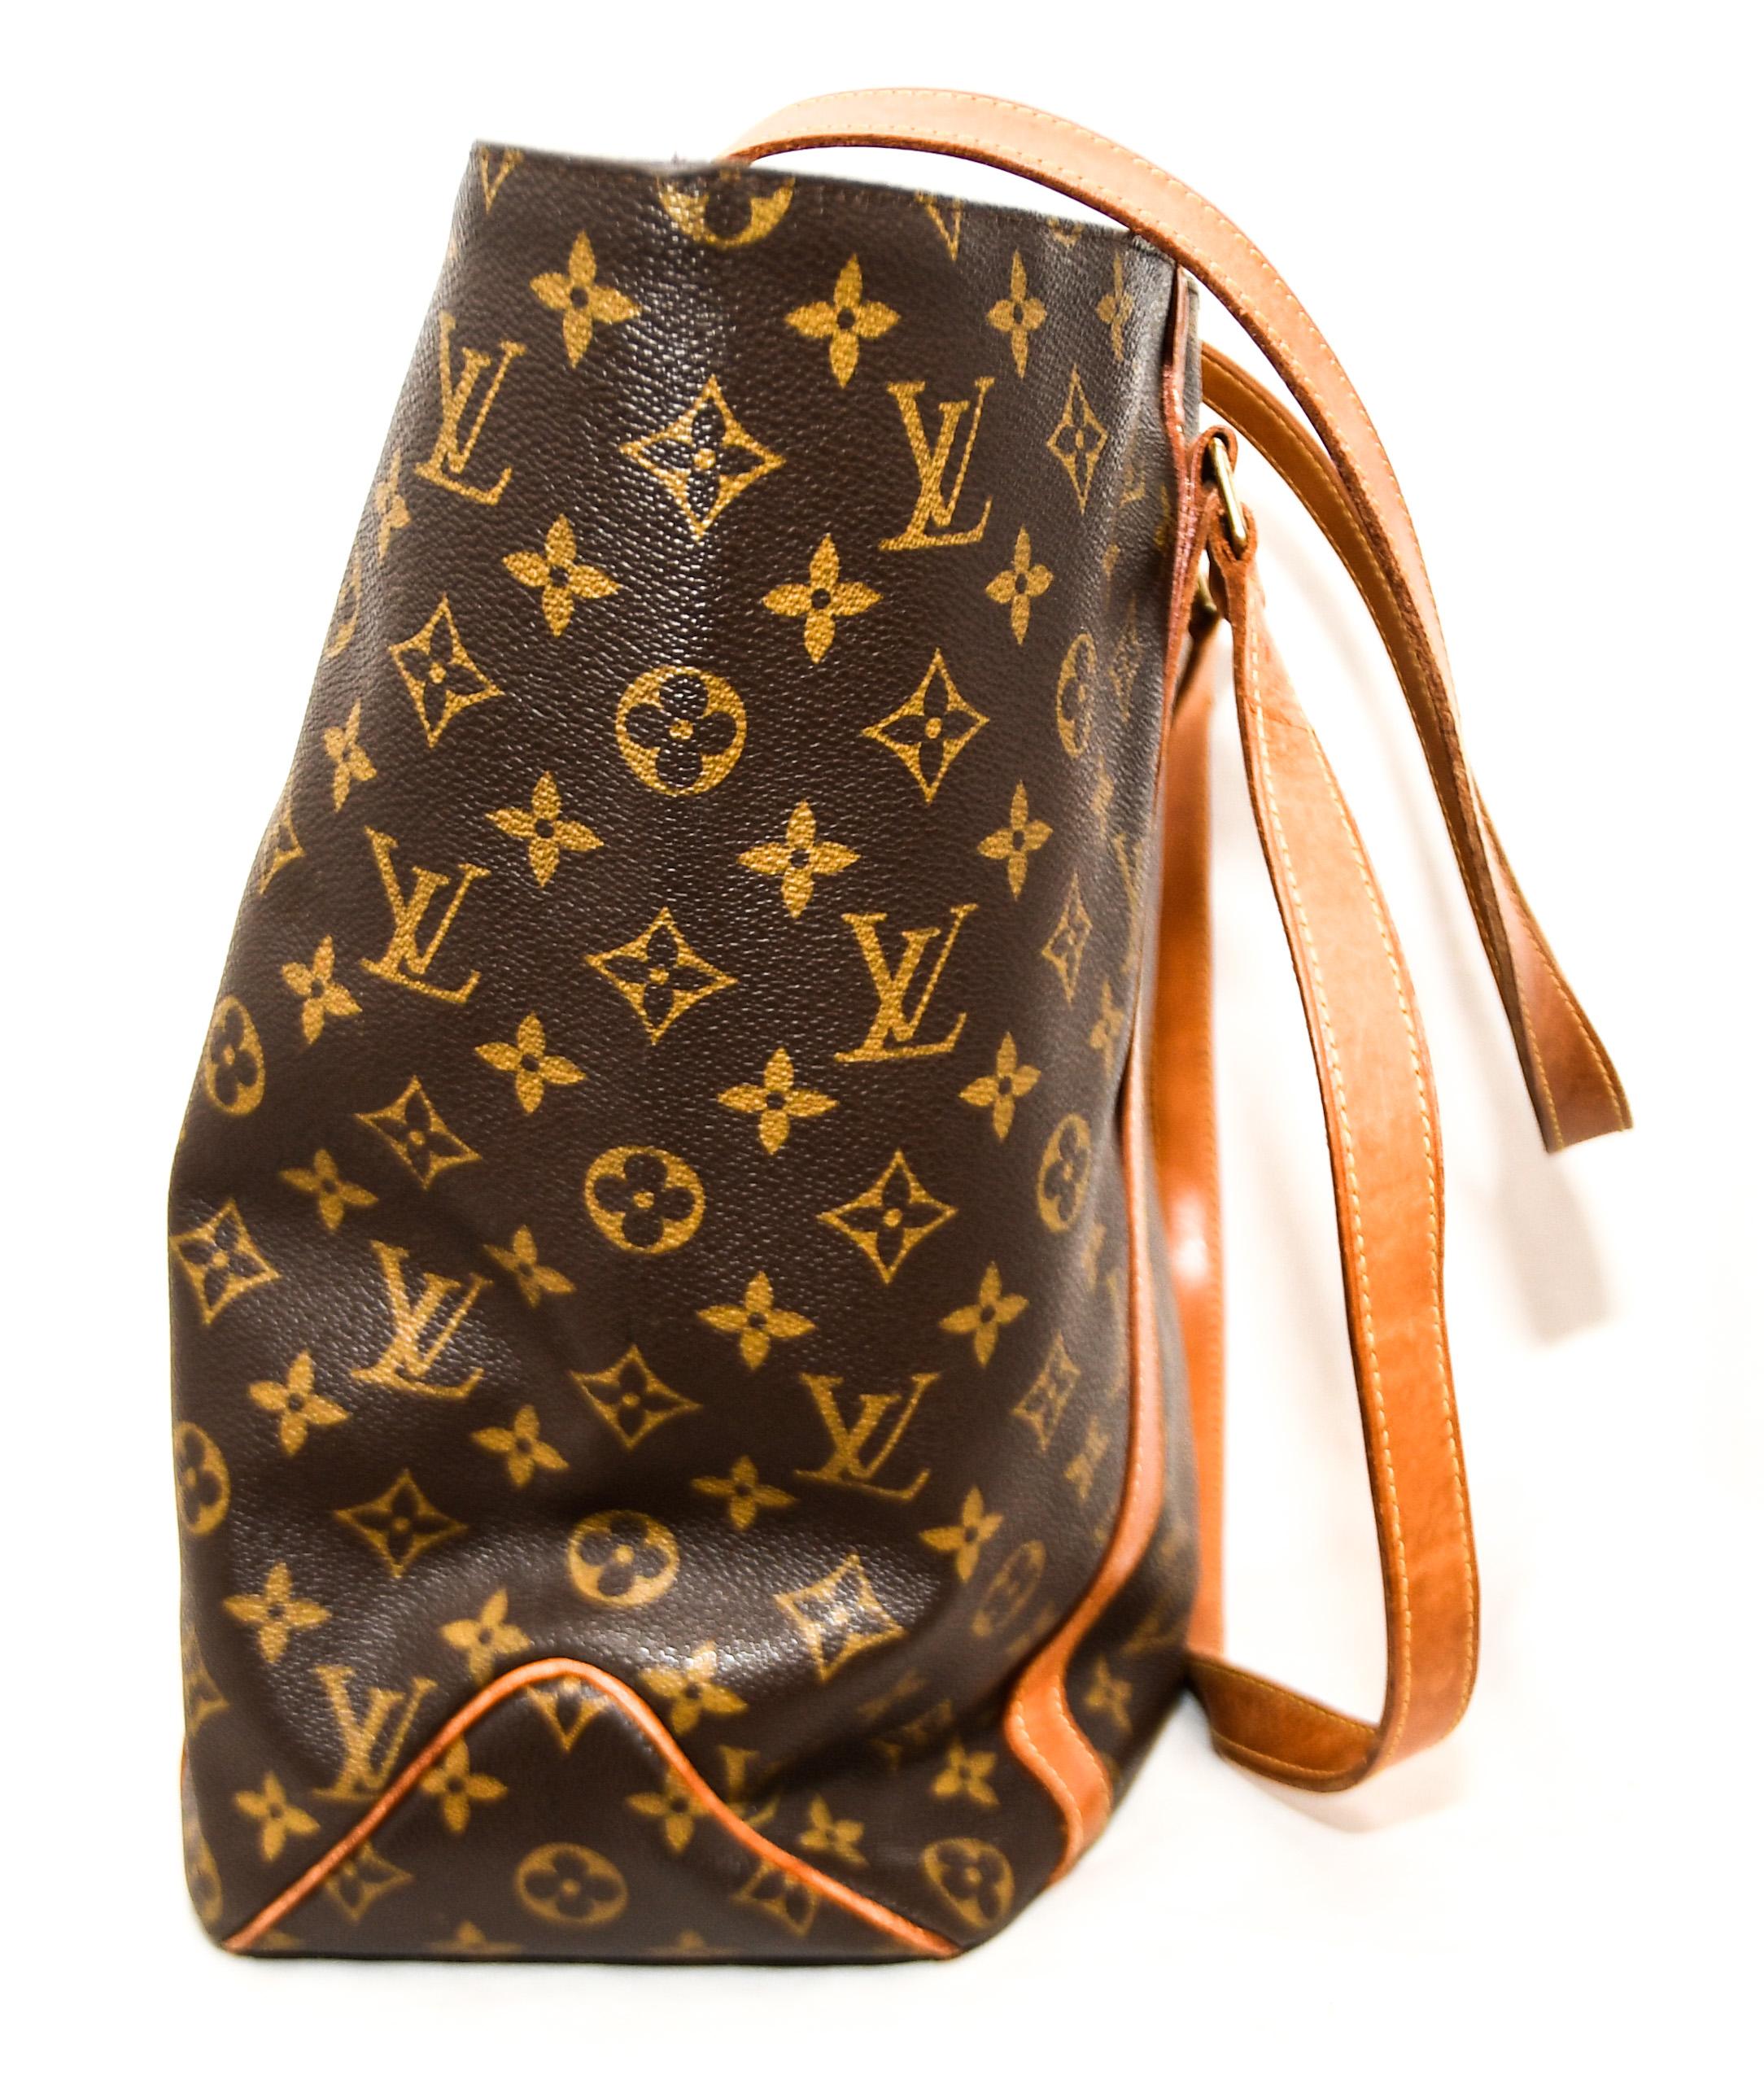 Louis Vuitton monogram Sac Shopping tote, is a large shopping tote designed to be carried with ease and simple to wear. It is crafted with the classic Louis Vuitton monogram coated canvas with complementary signature vachetta natural cowhide